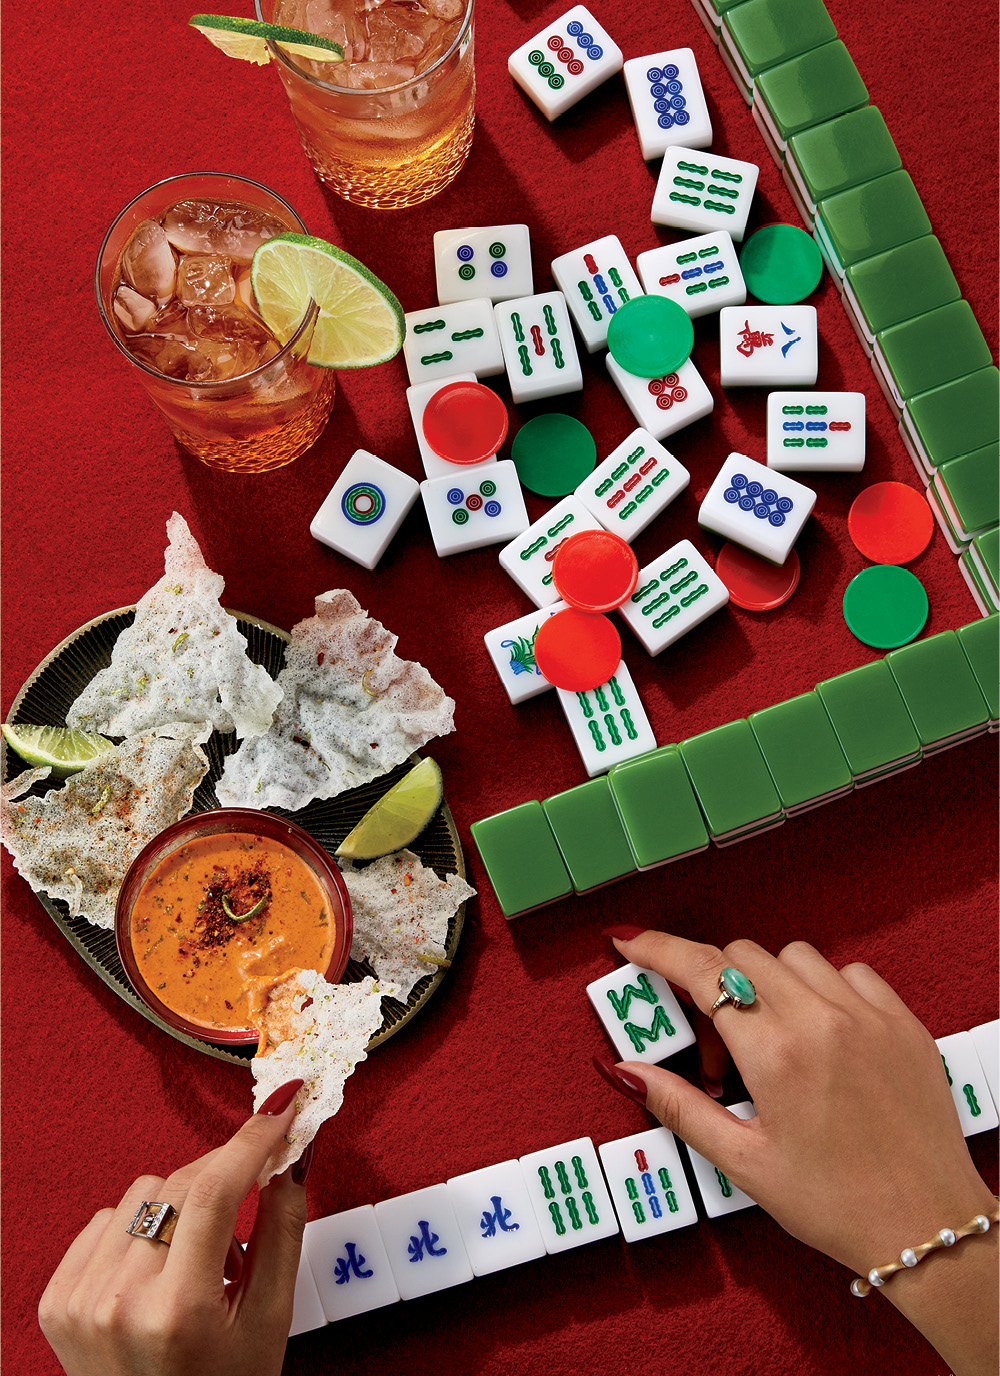 A table with mahjong tiles on a red tablecloth, you can see a woman's hands, she is eating from a bowl of rice paper chips with peanut dipping sauce, there are two spiced rum and ginger beer cocktails